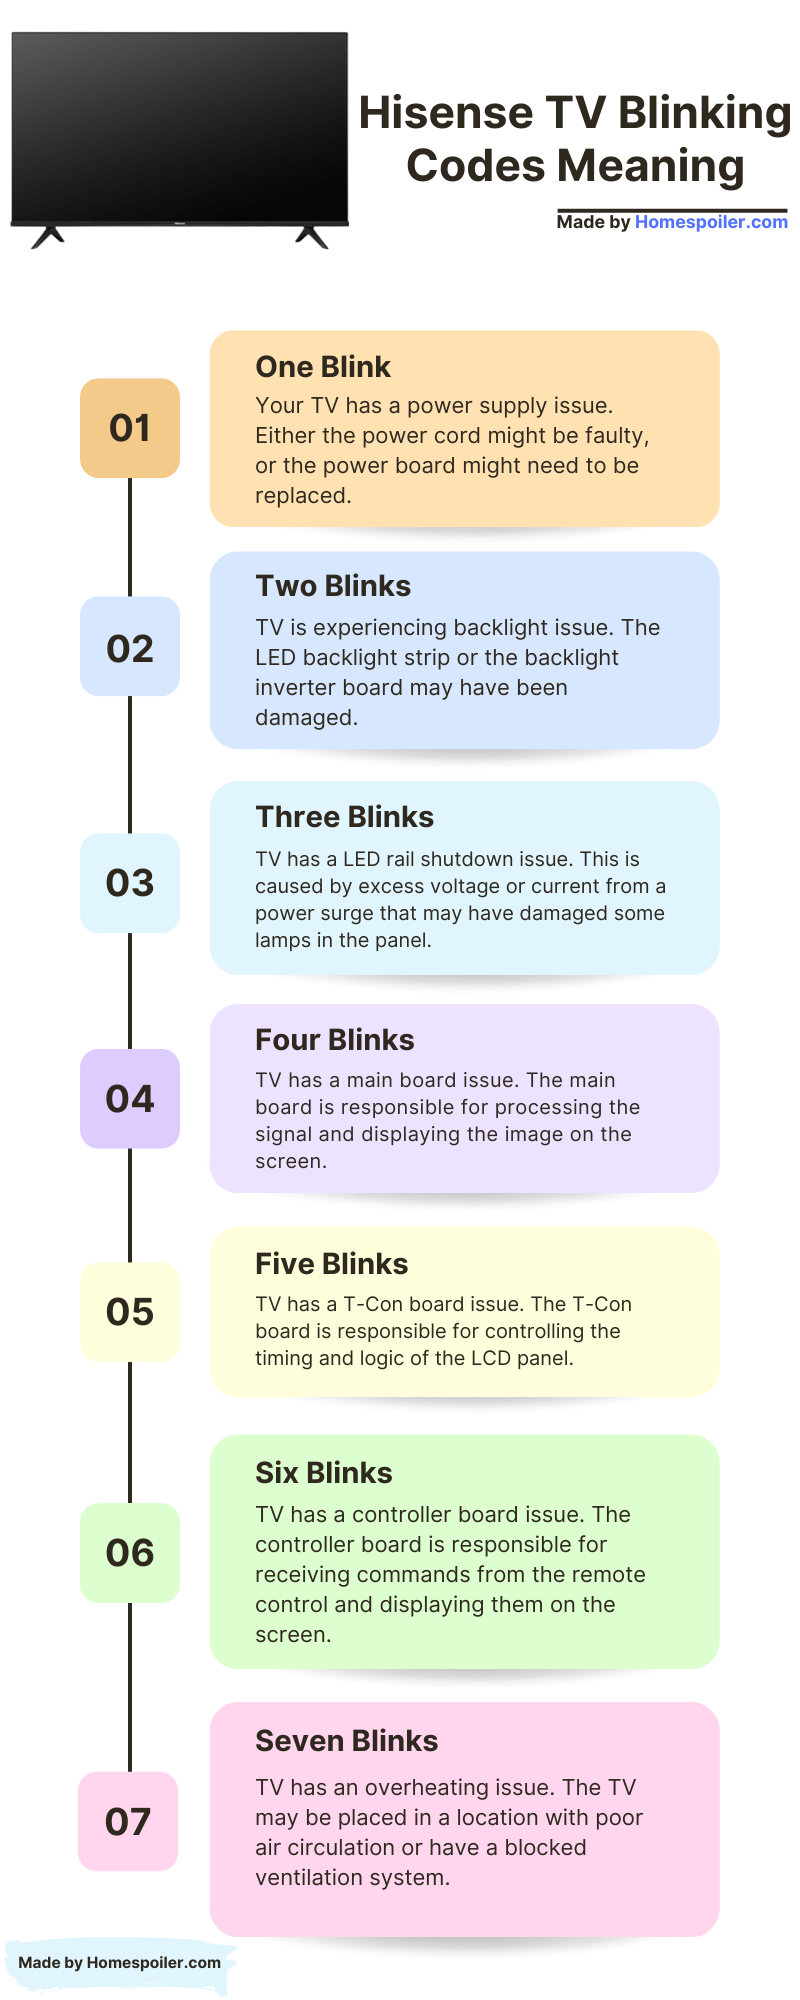 Hisense TV Blinking Codes Explained with a Infographic